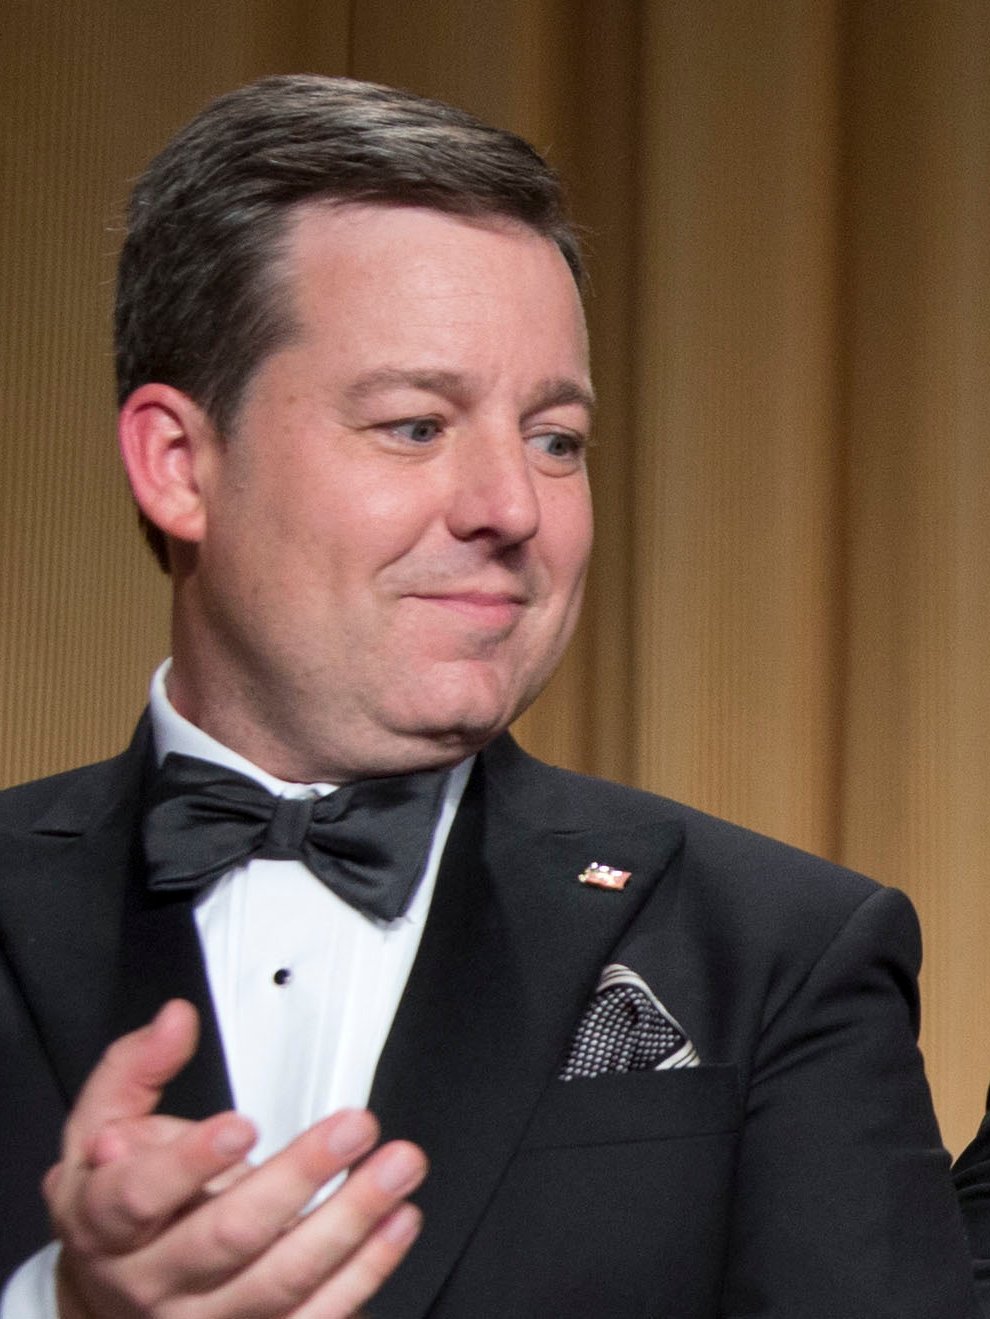 Fox News has fired news anchor Ed Henry after it received a complaint about workplace sexual misconduct 